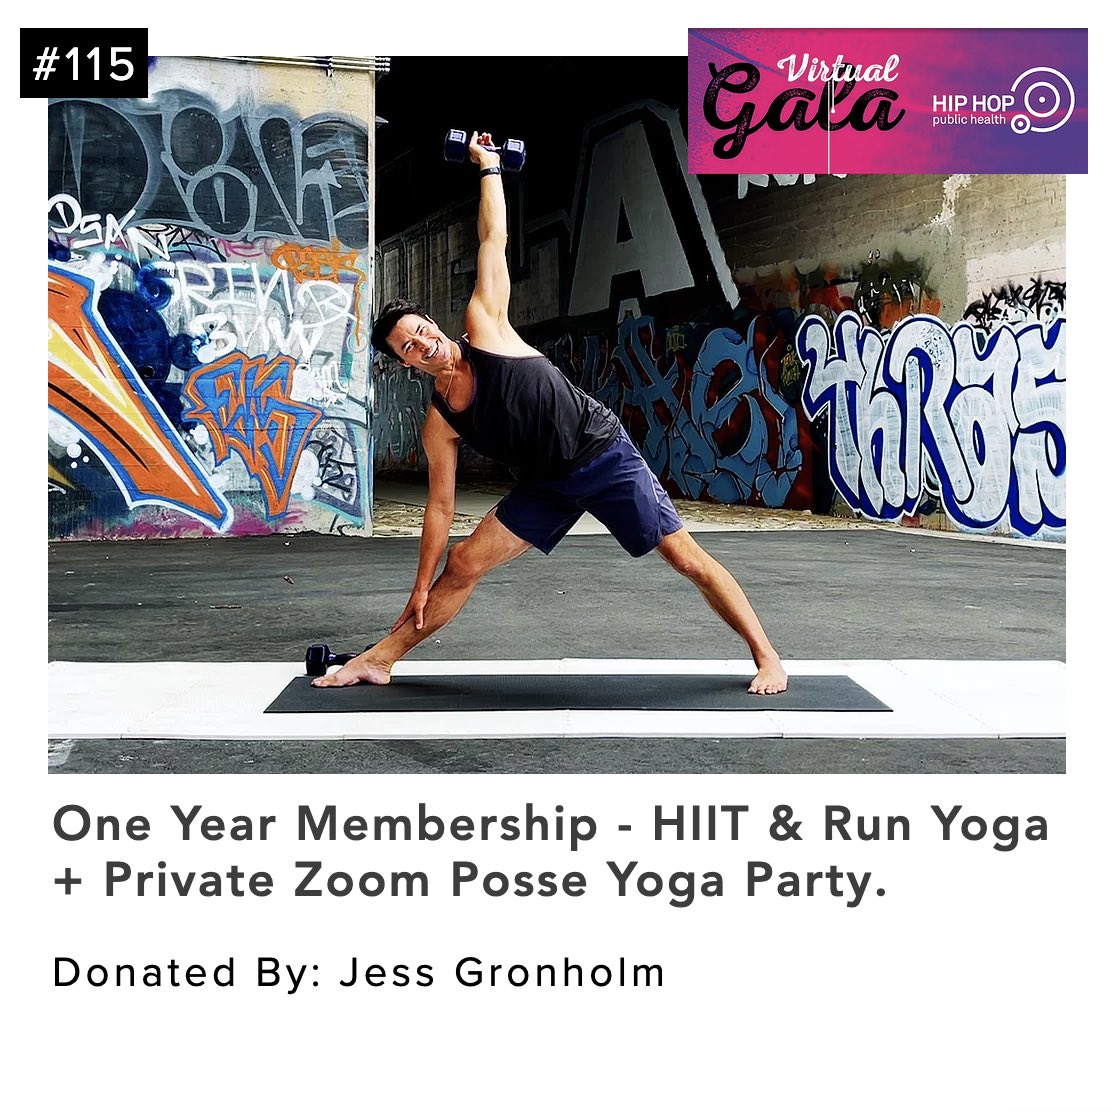 Bid on me as part of the fundraiser gala for @hhphorg tonight - I’m number #115 🕺🏿🕺🏿🕺🏿. This is an All Access Pass to online yoga workouts including an hour long yoga Zoom session for the Winner and their closest crew

#hiphoppublichealth #hiitandrunyoga #jessgronholm